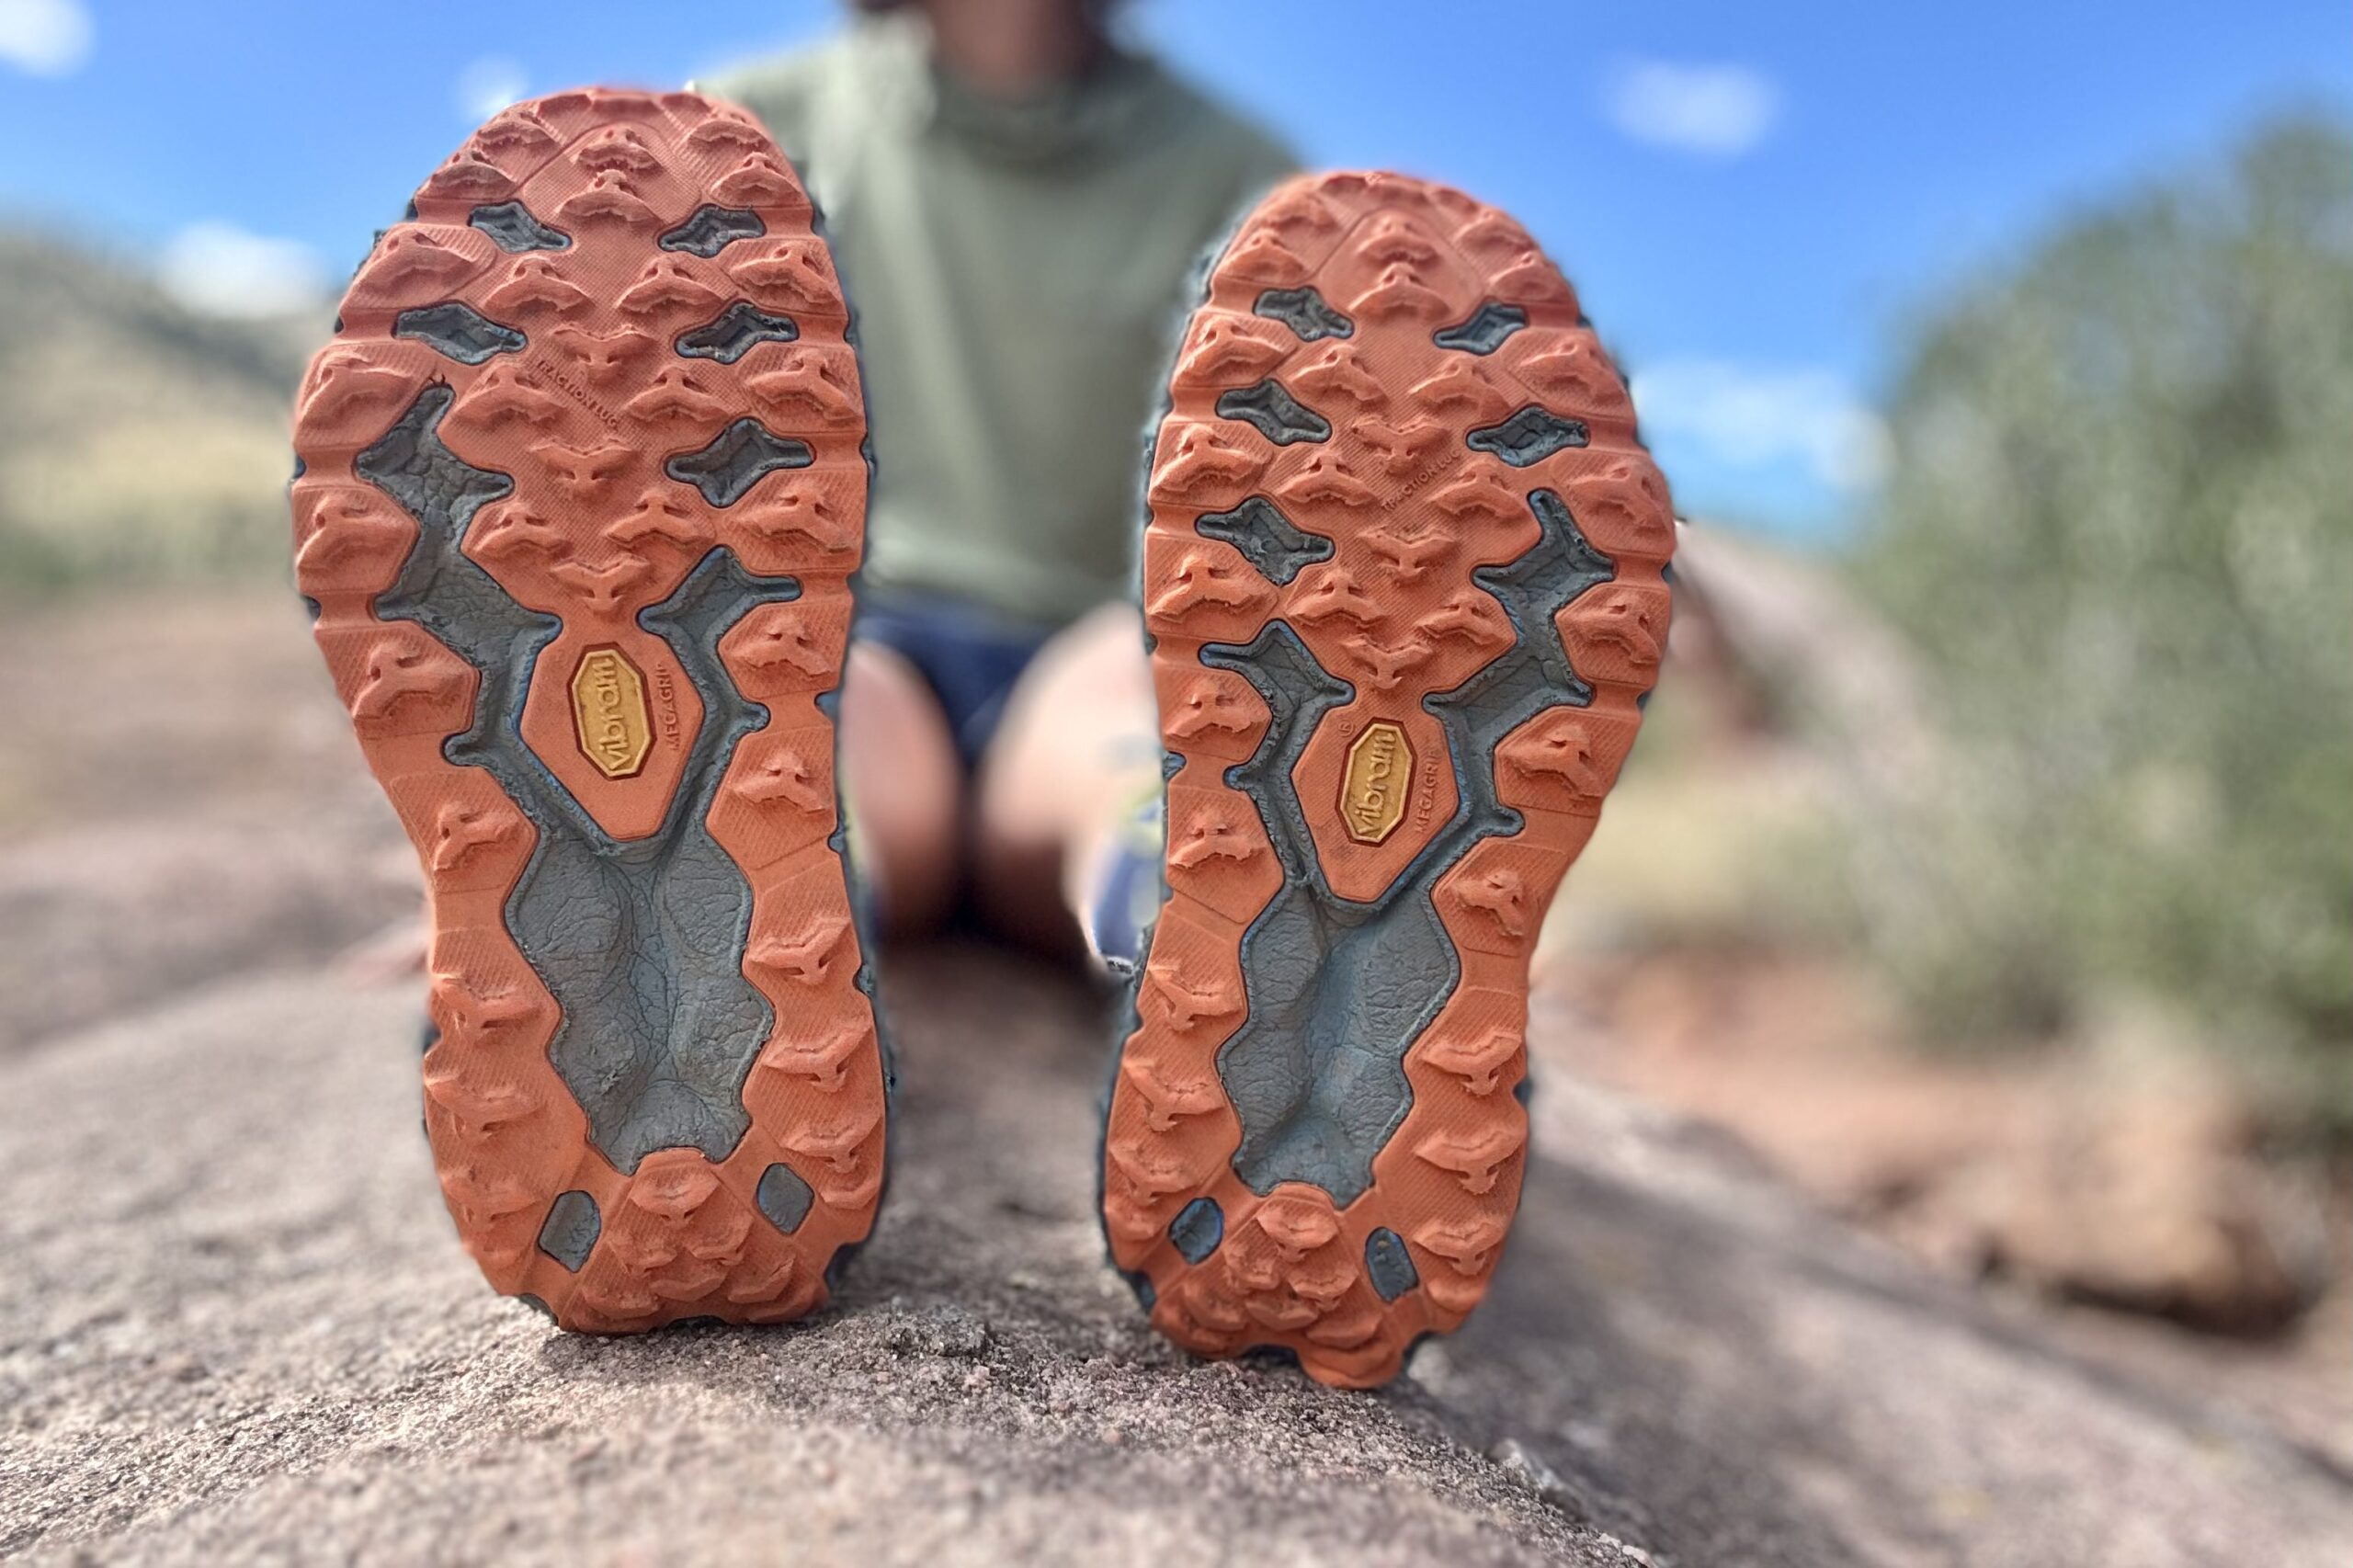 Closeup of trail running shoes looking directly at their outsoles / tread / bottom of shoe, with everything else in background blurred.